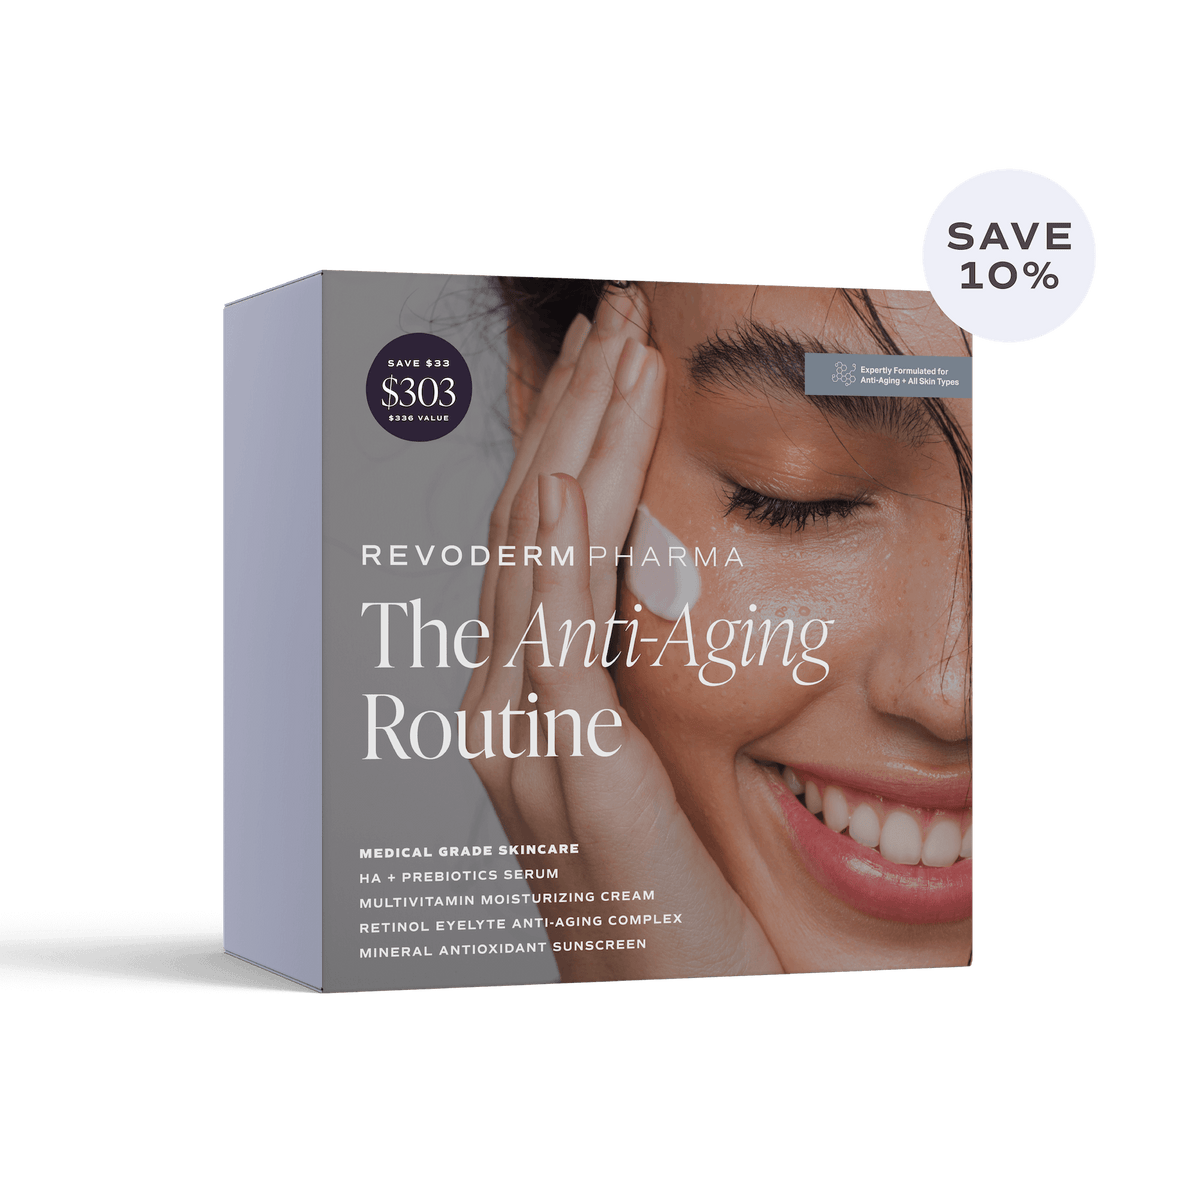 The Anti-Aging Routine